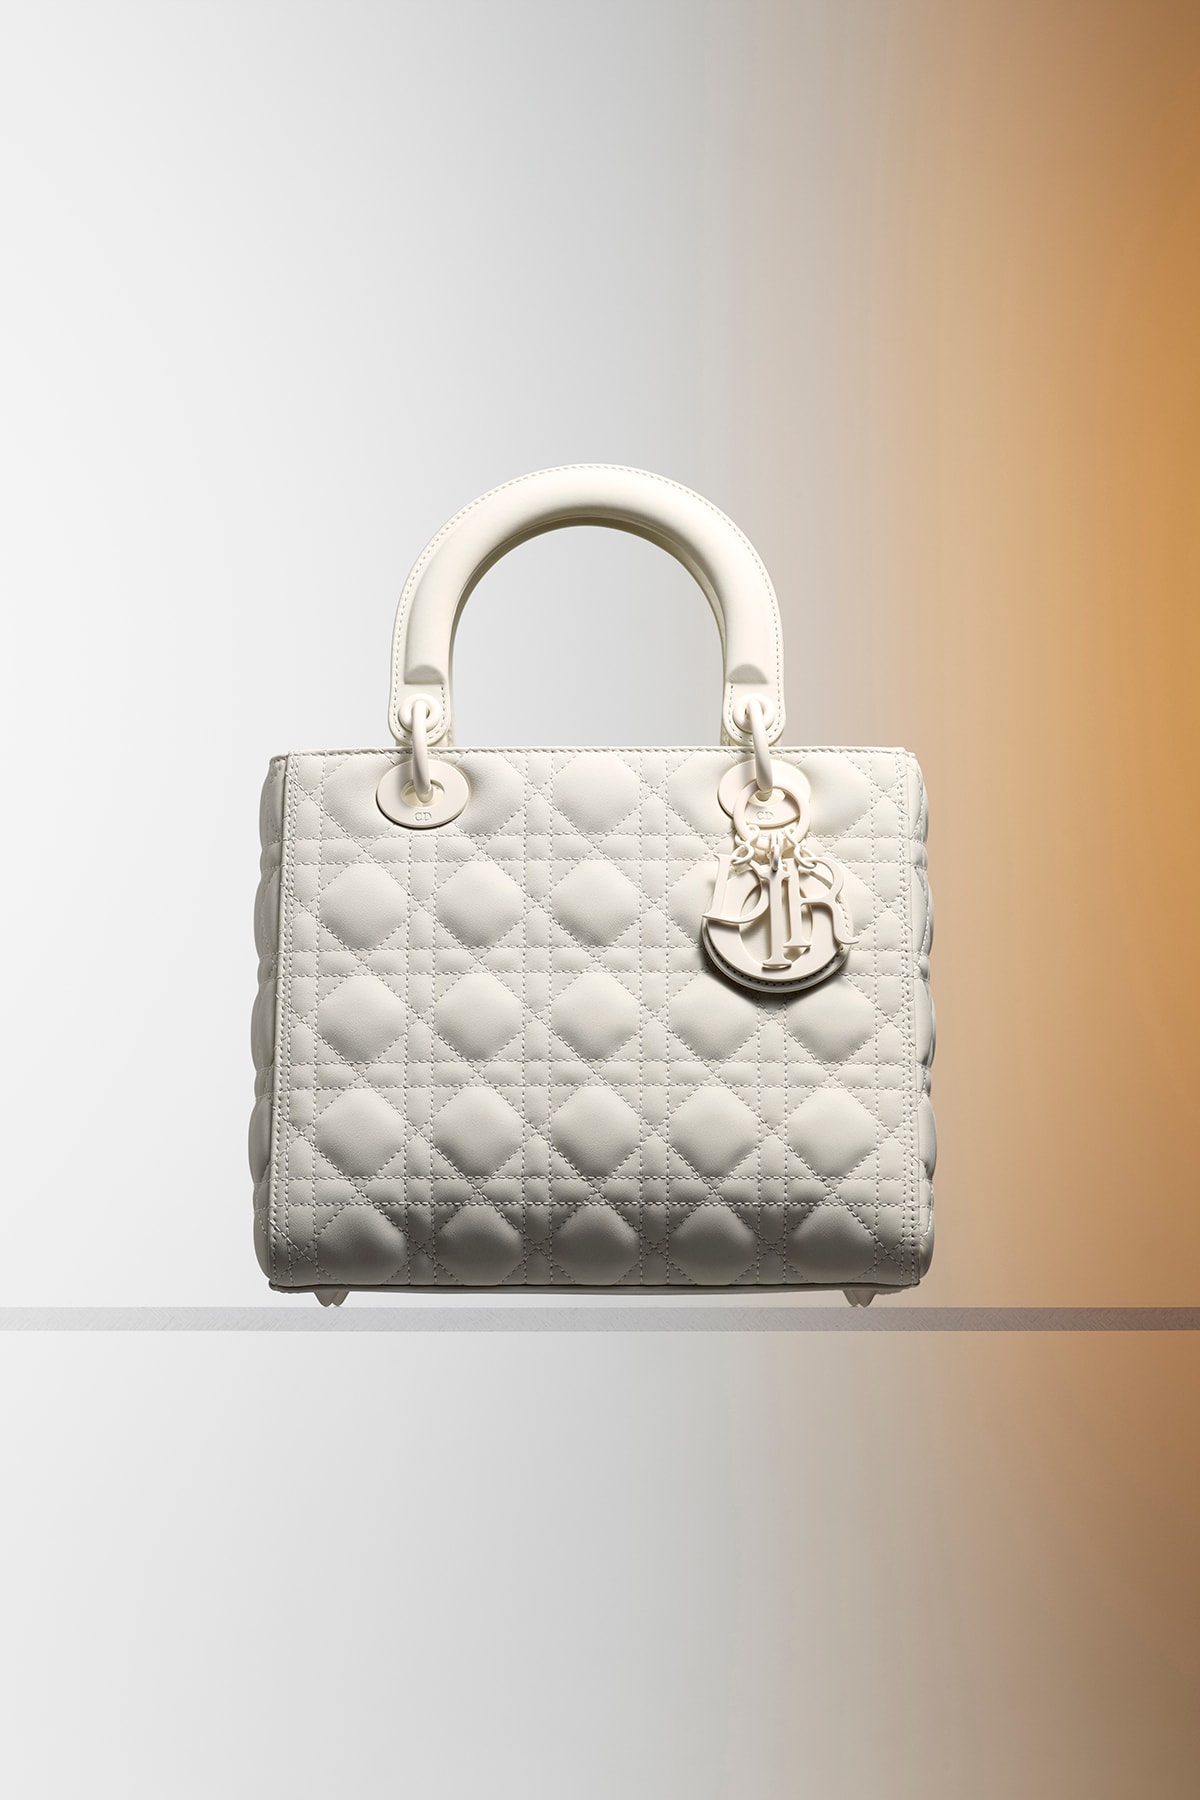 Dior Ultra-Matte Collection Bags Lady Dior White